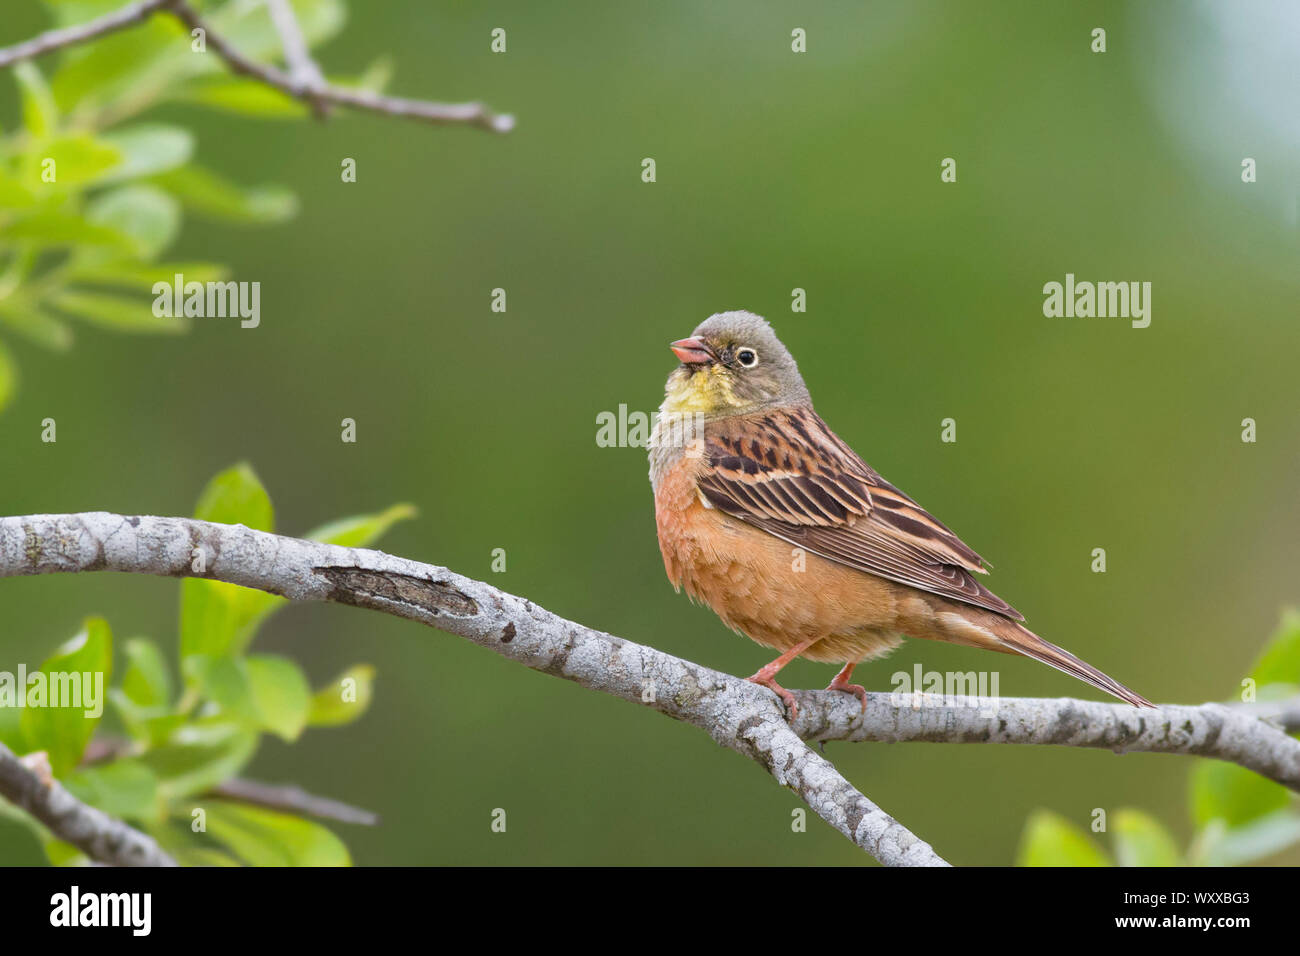 Ortolan Bunting (Emberiza hortulana). A adult bird singing from a branch. Taken in Sweden in June. Stock Photo